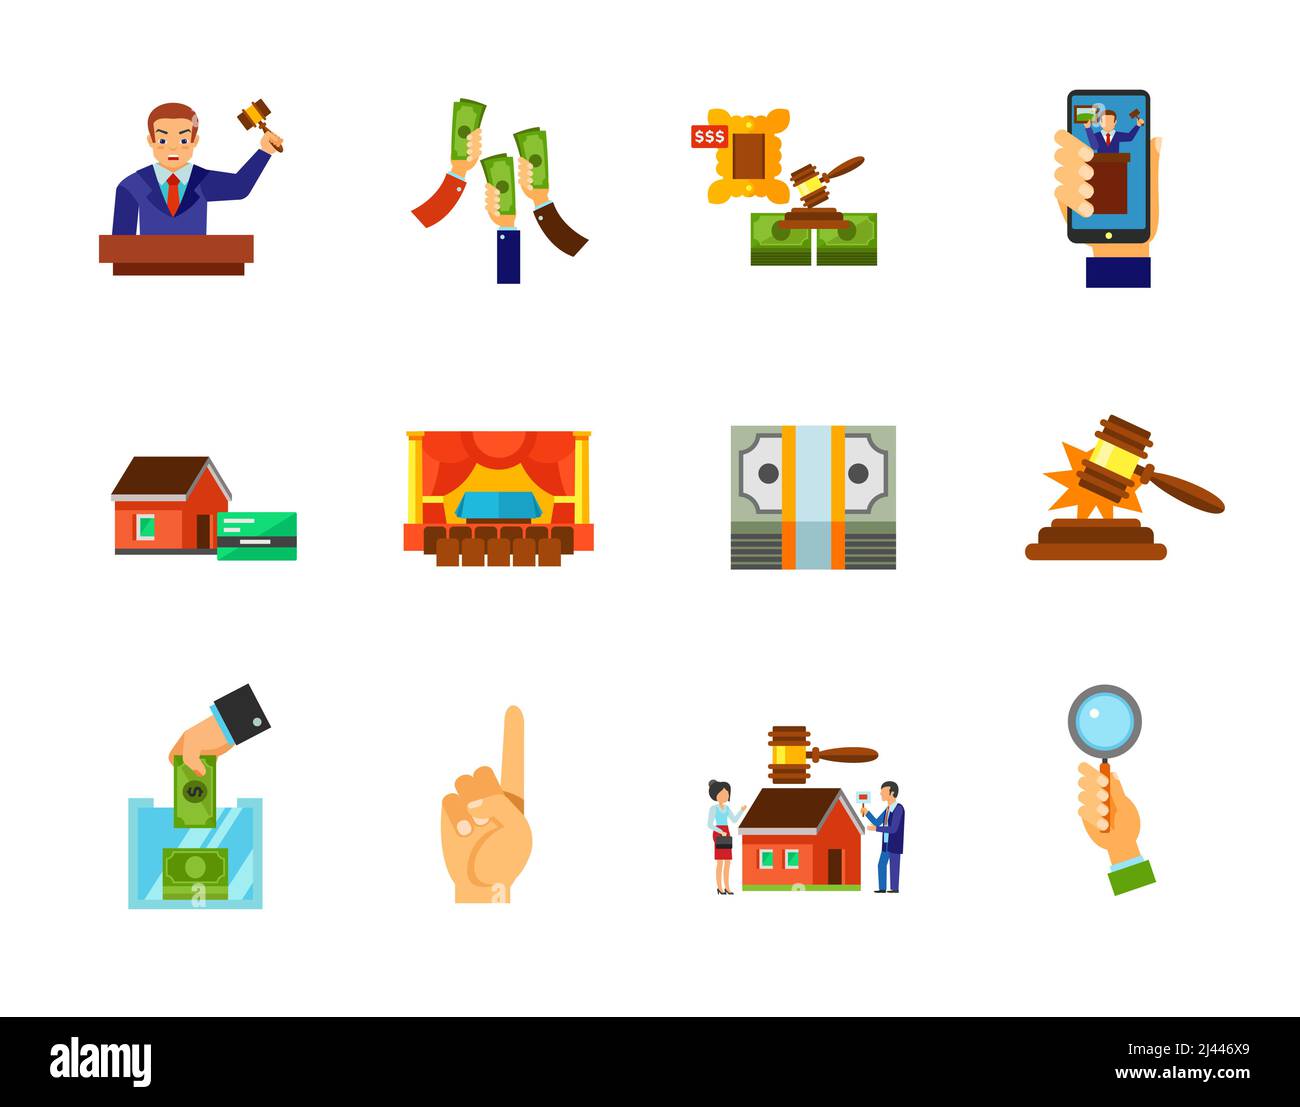 Auction icon set. Auctioneer Raising money Lot Internet auction Interior Sold sound Building auction Bidder hand. Contains bonus icons of Mortgage Dol Stock Vector